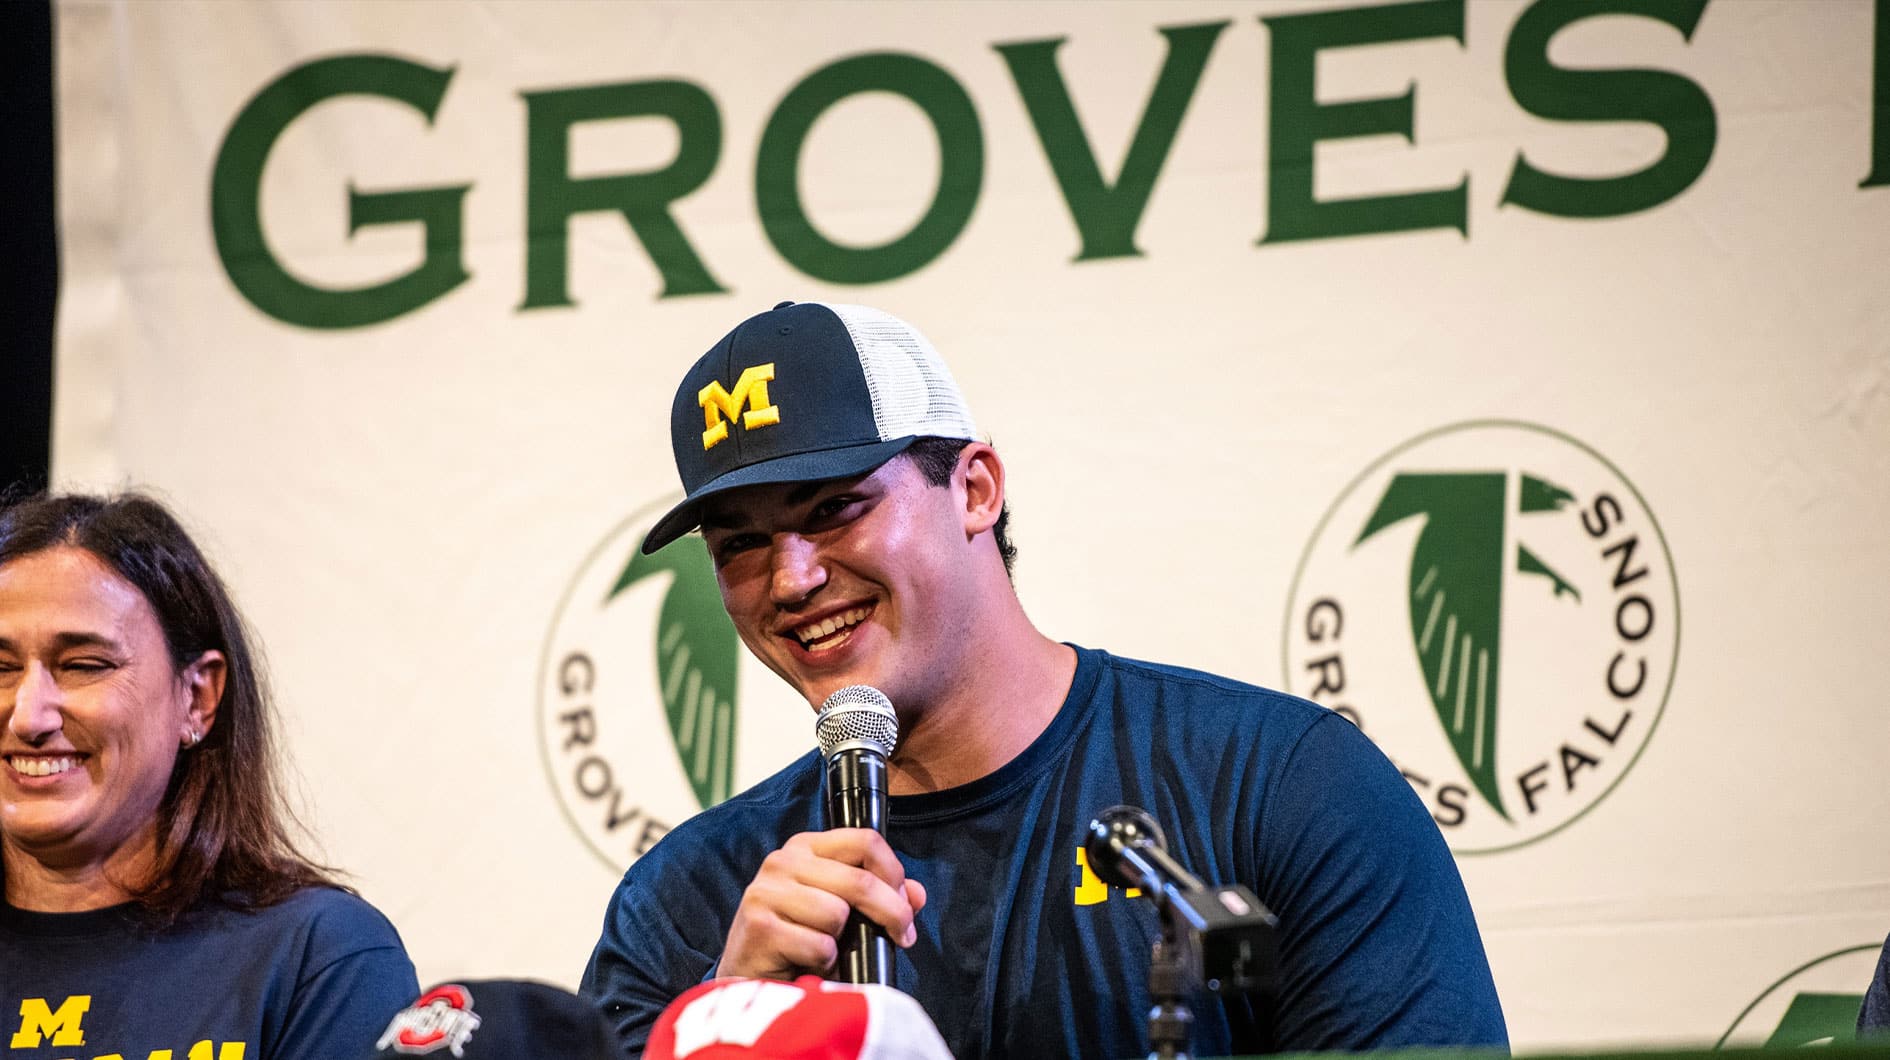 Birmingham Groves junior Avery Gach announced his verbal commitment to play for Michigan football during a special ceremony